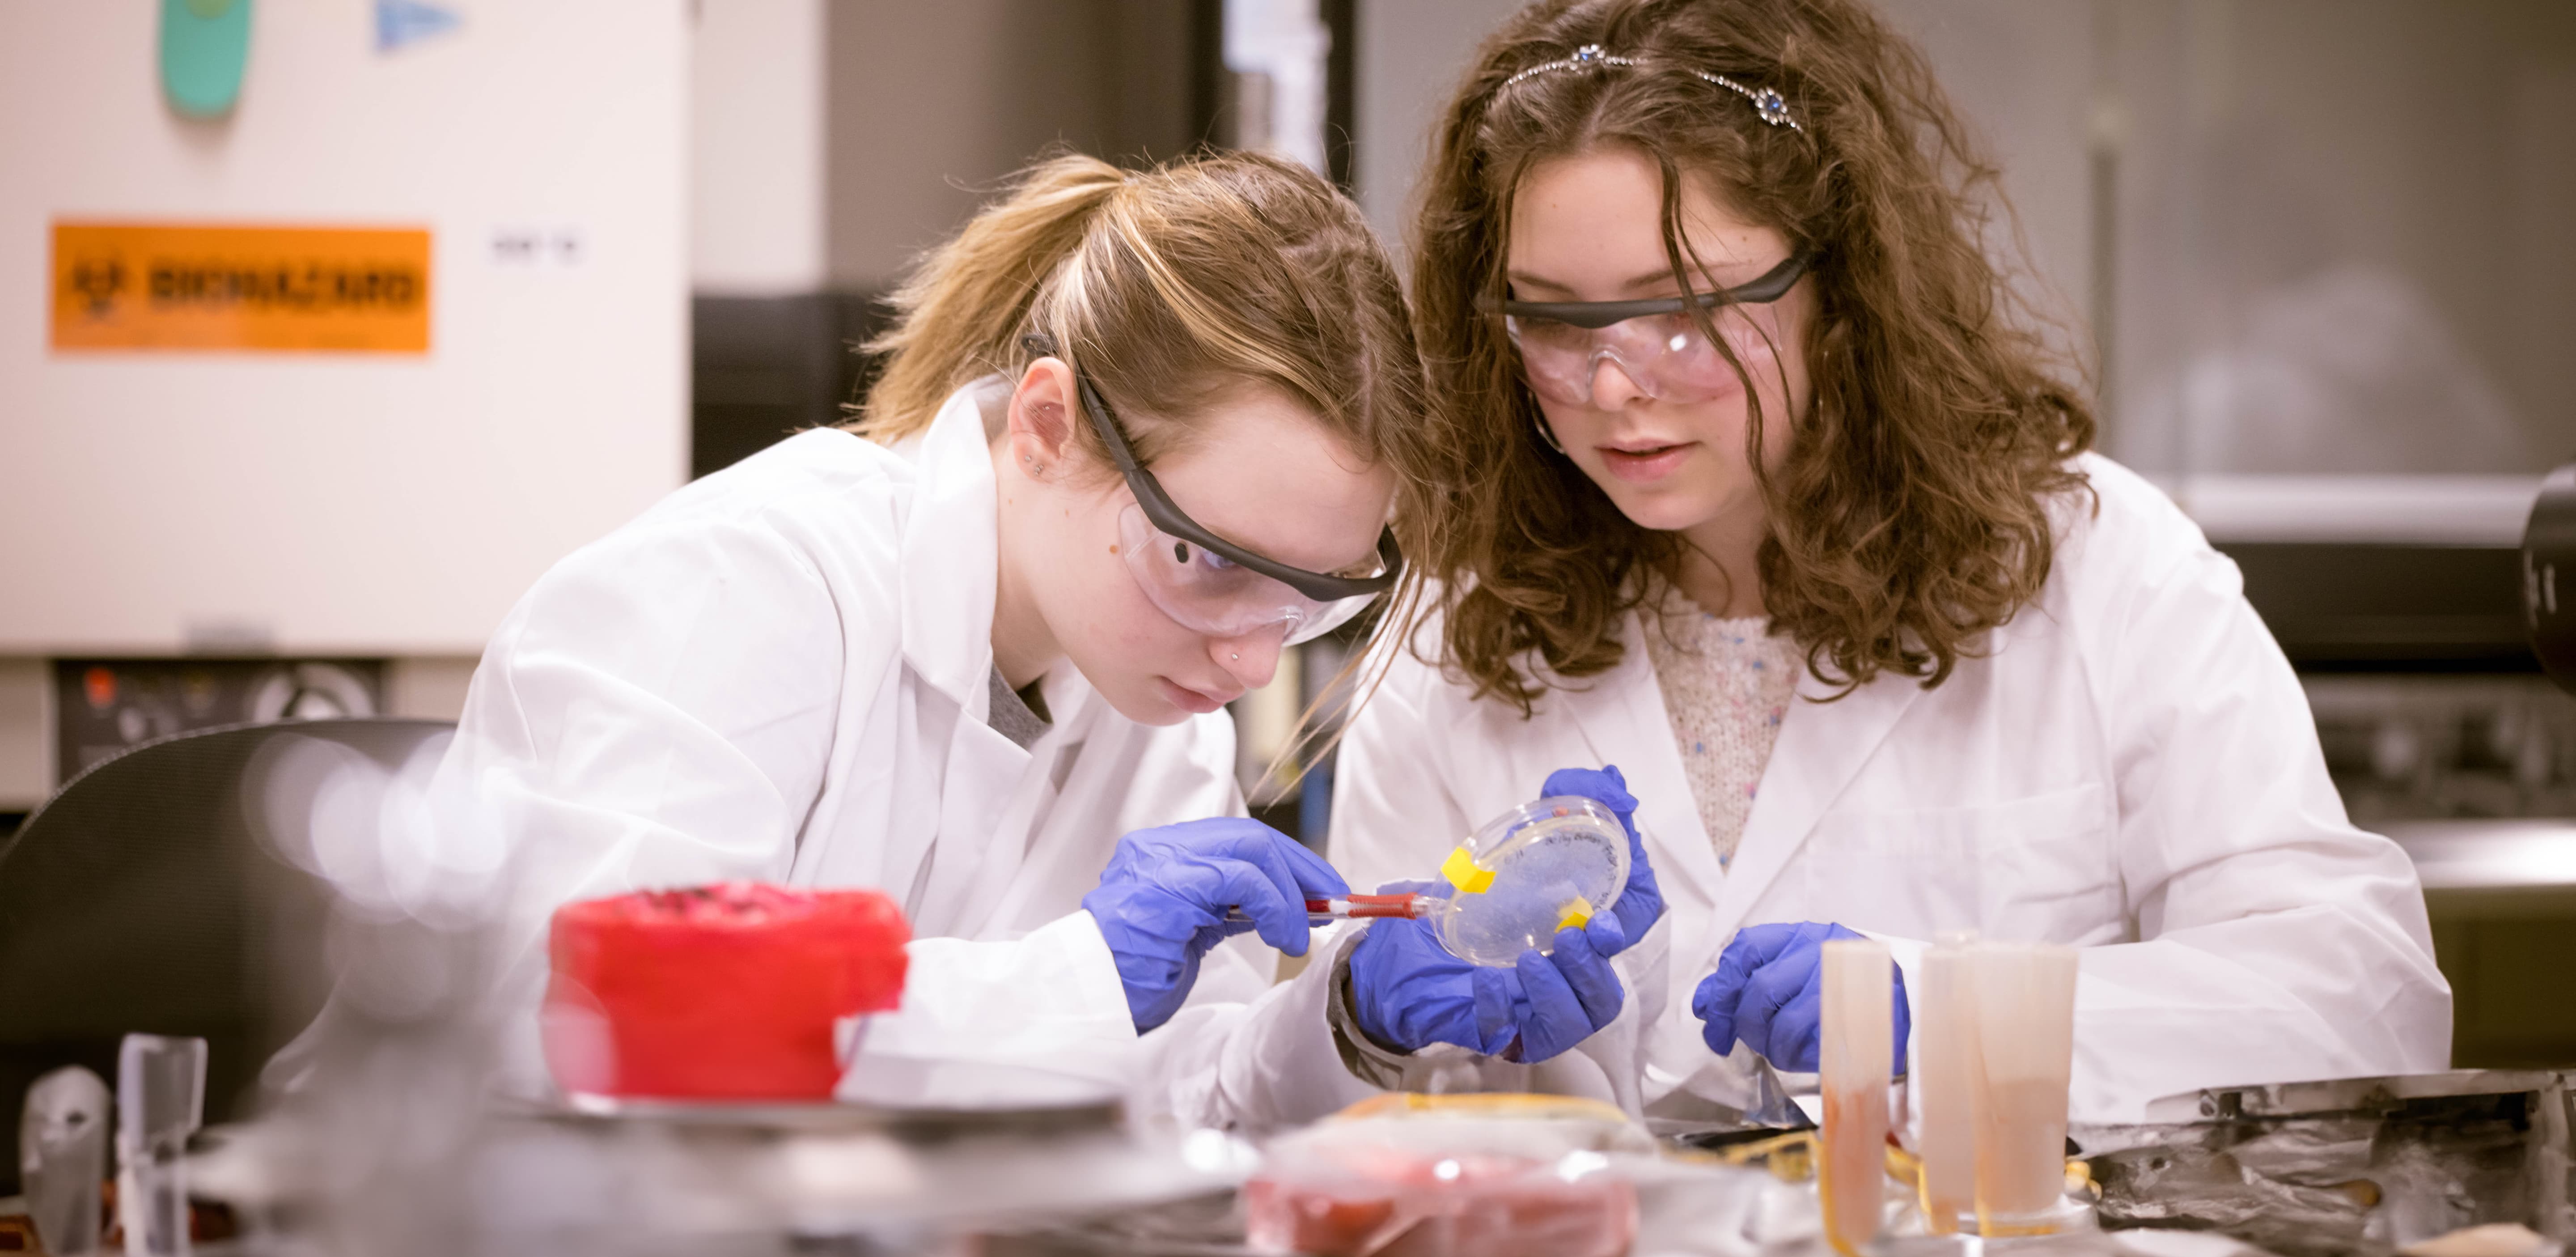 Two female students working in a lab.